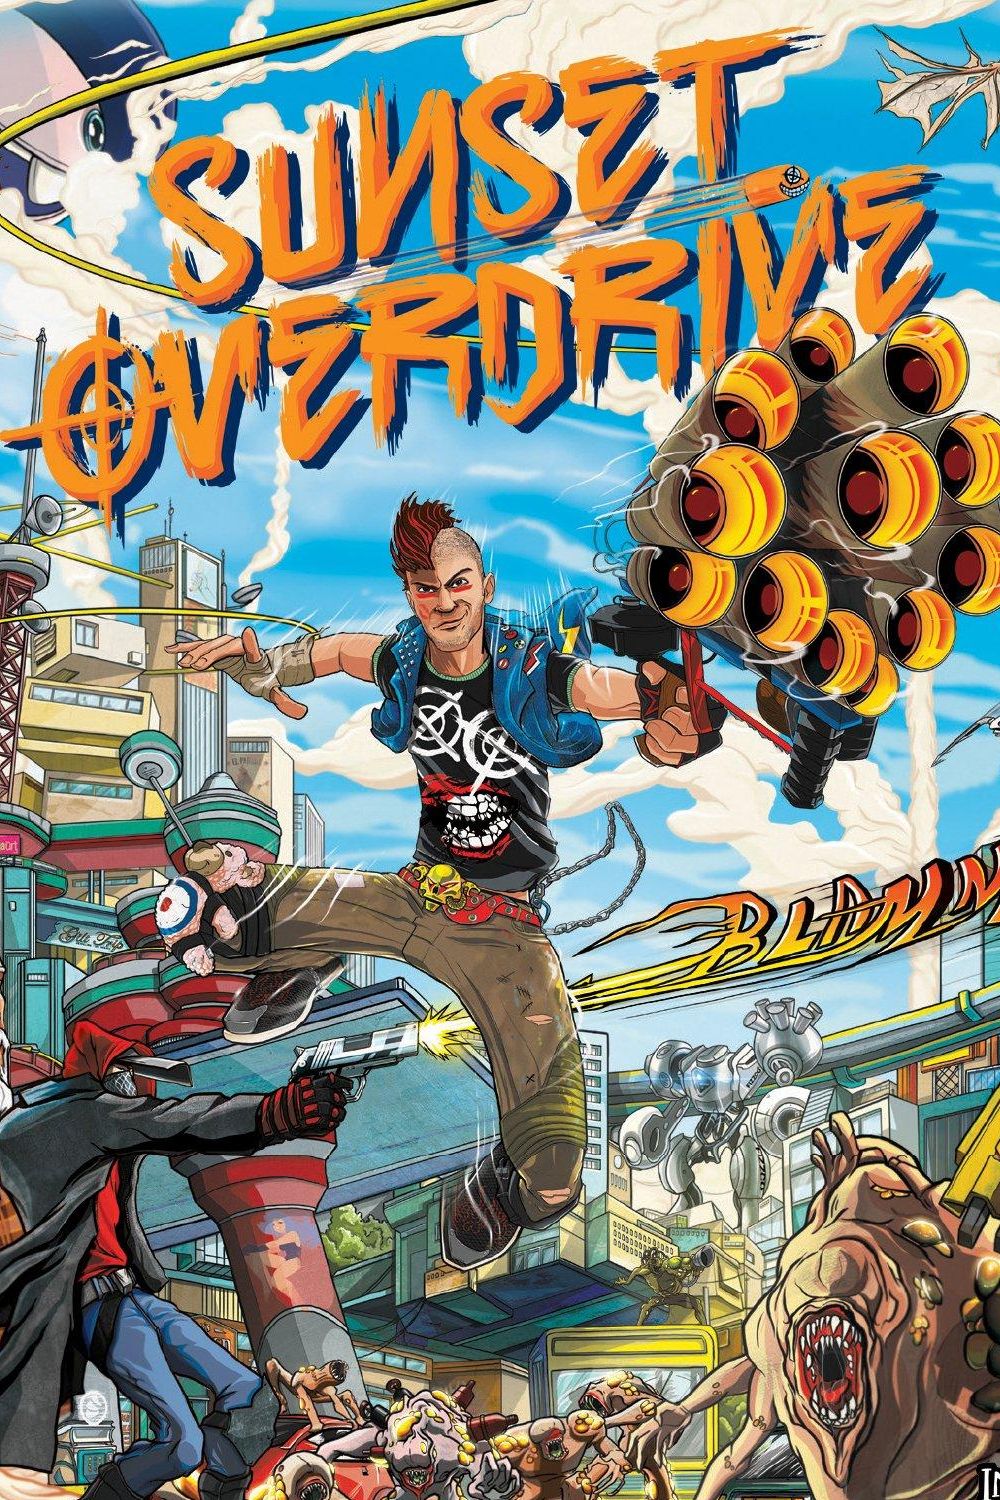 Sunset Overdrive Trademark Registered By Sony - PS5 Port Coming